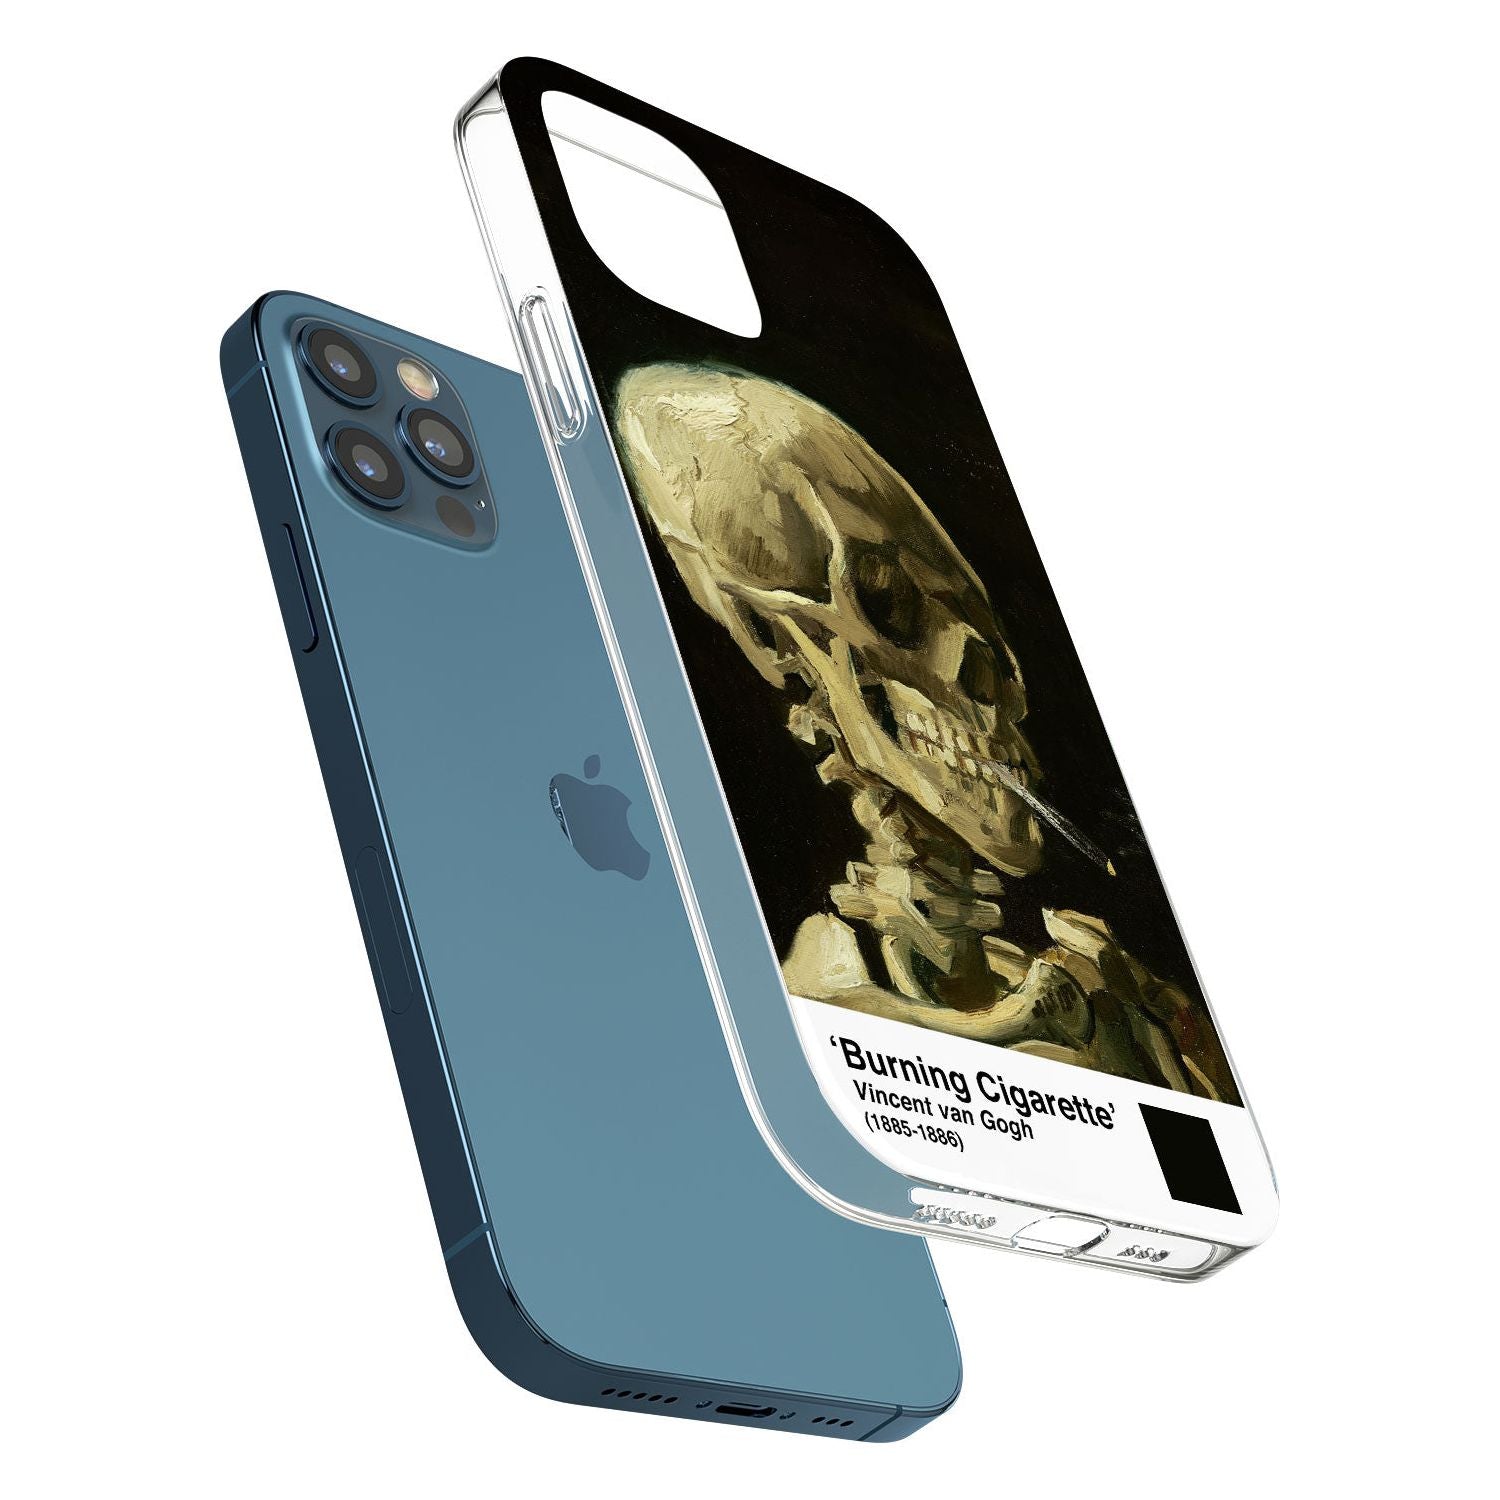 The Birth of Venus Phone Case for iPhone 12 Pro